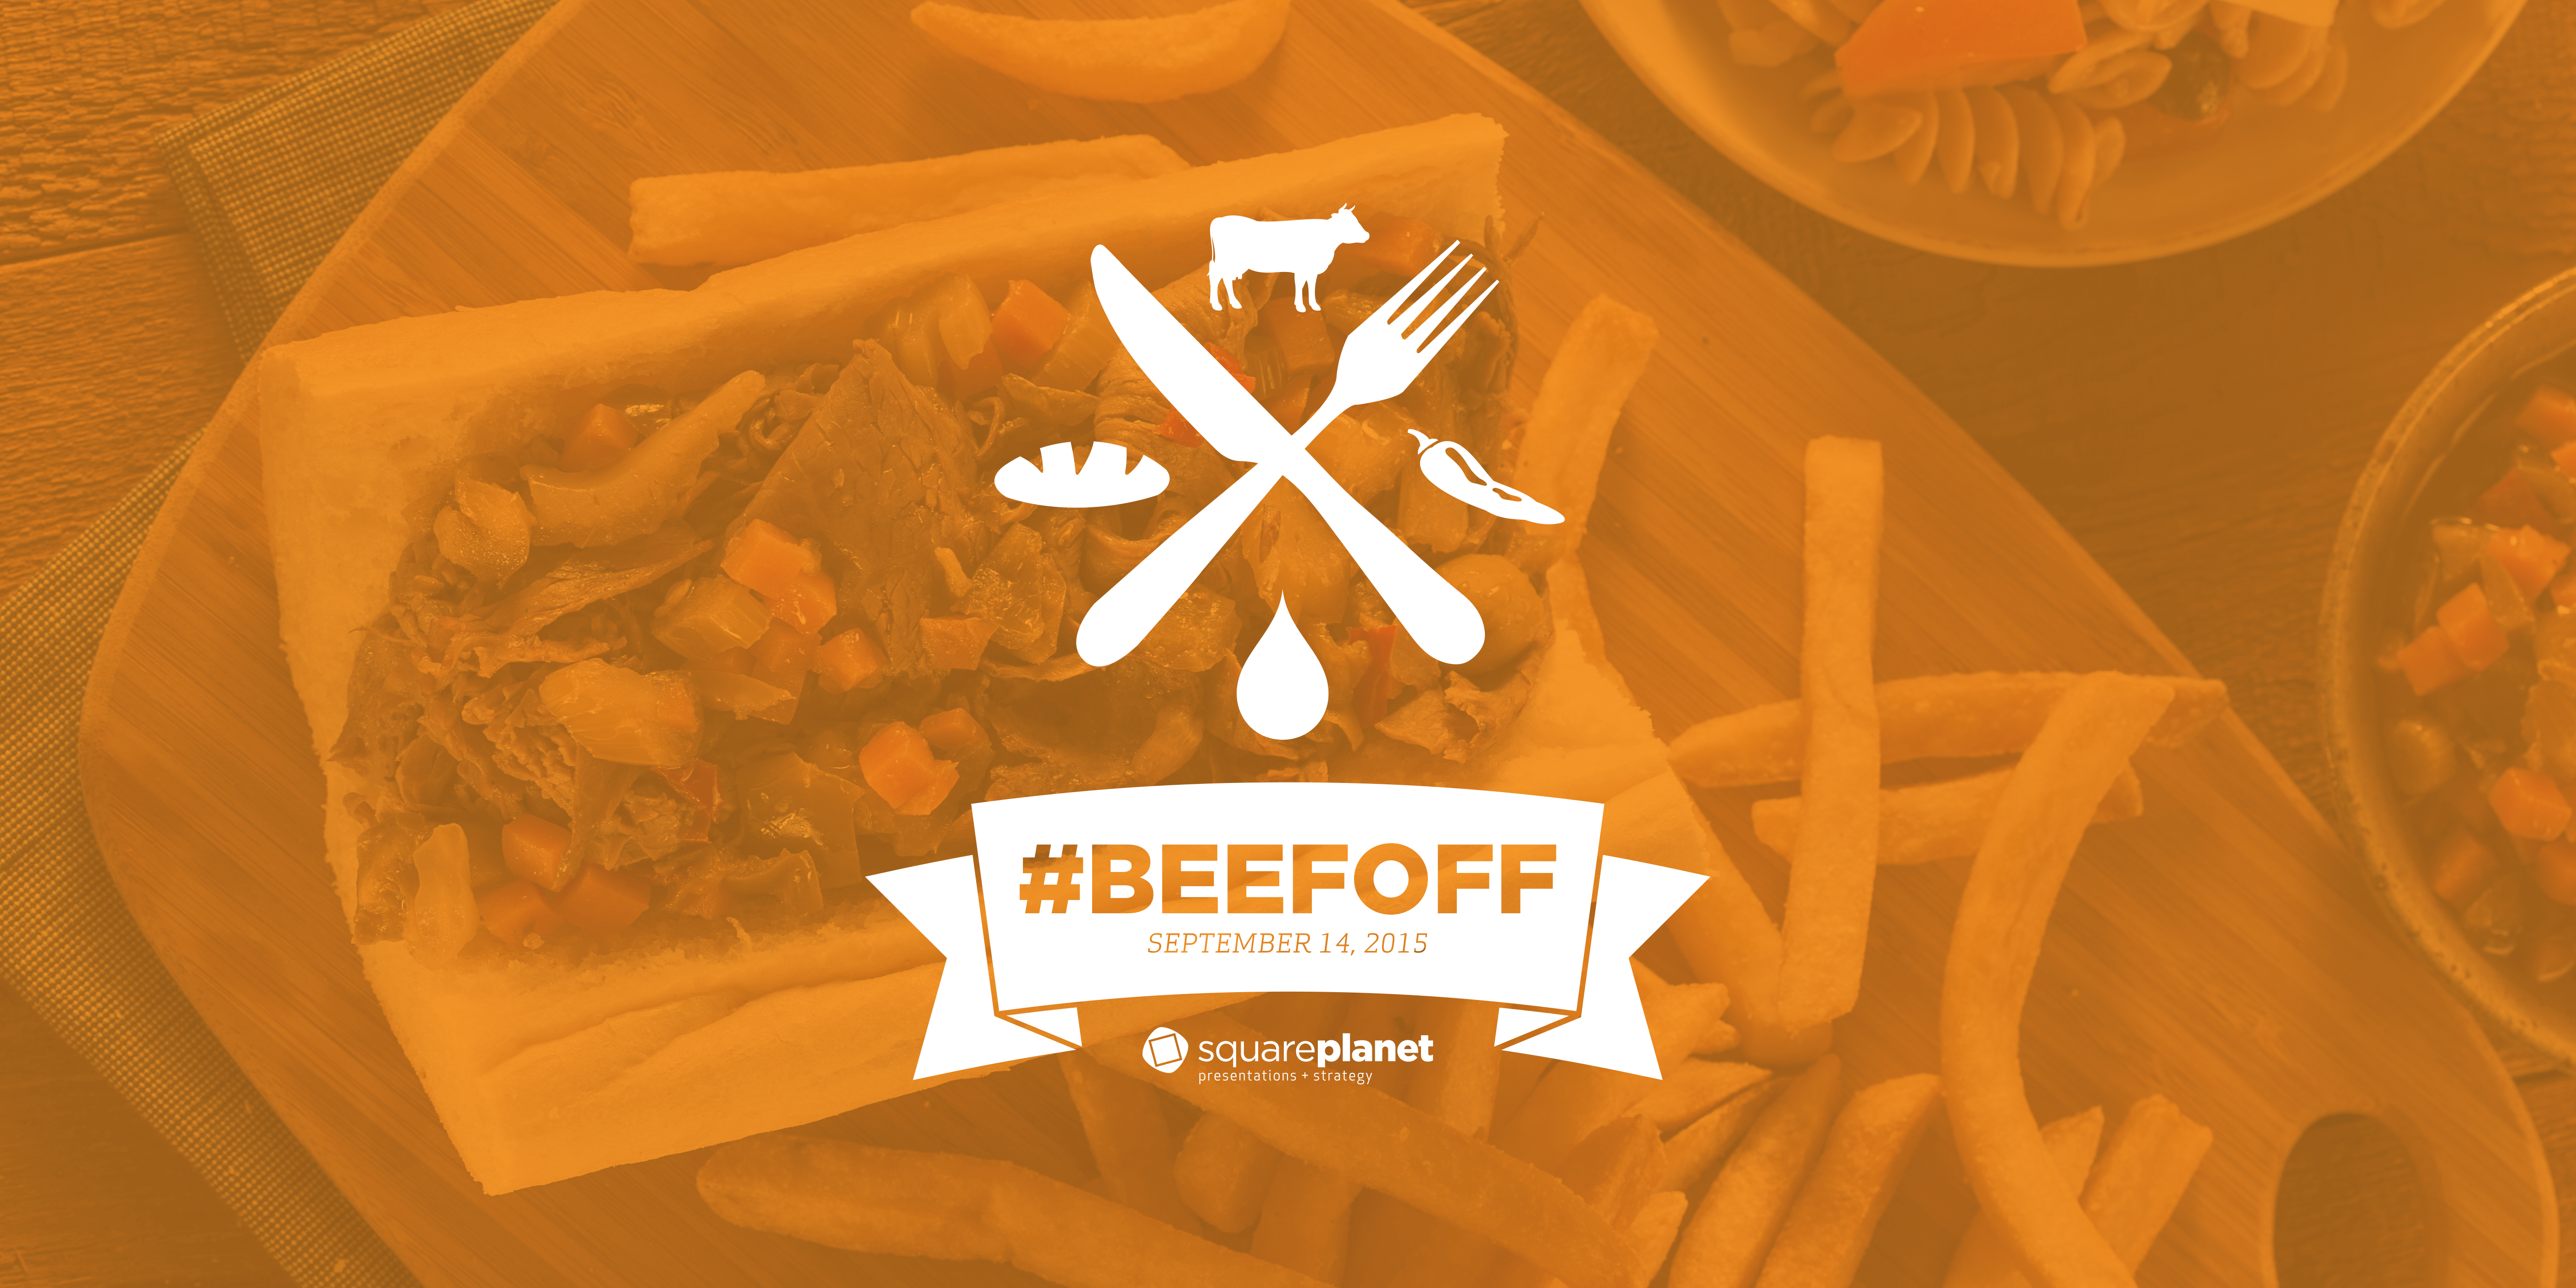 The 100% True Story Behind #BeefOff: A Quest for the Best Italian Beef in Chicago